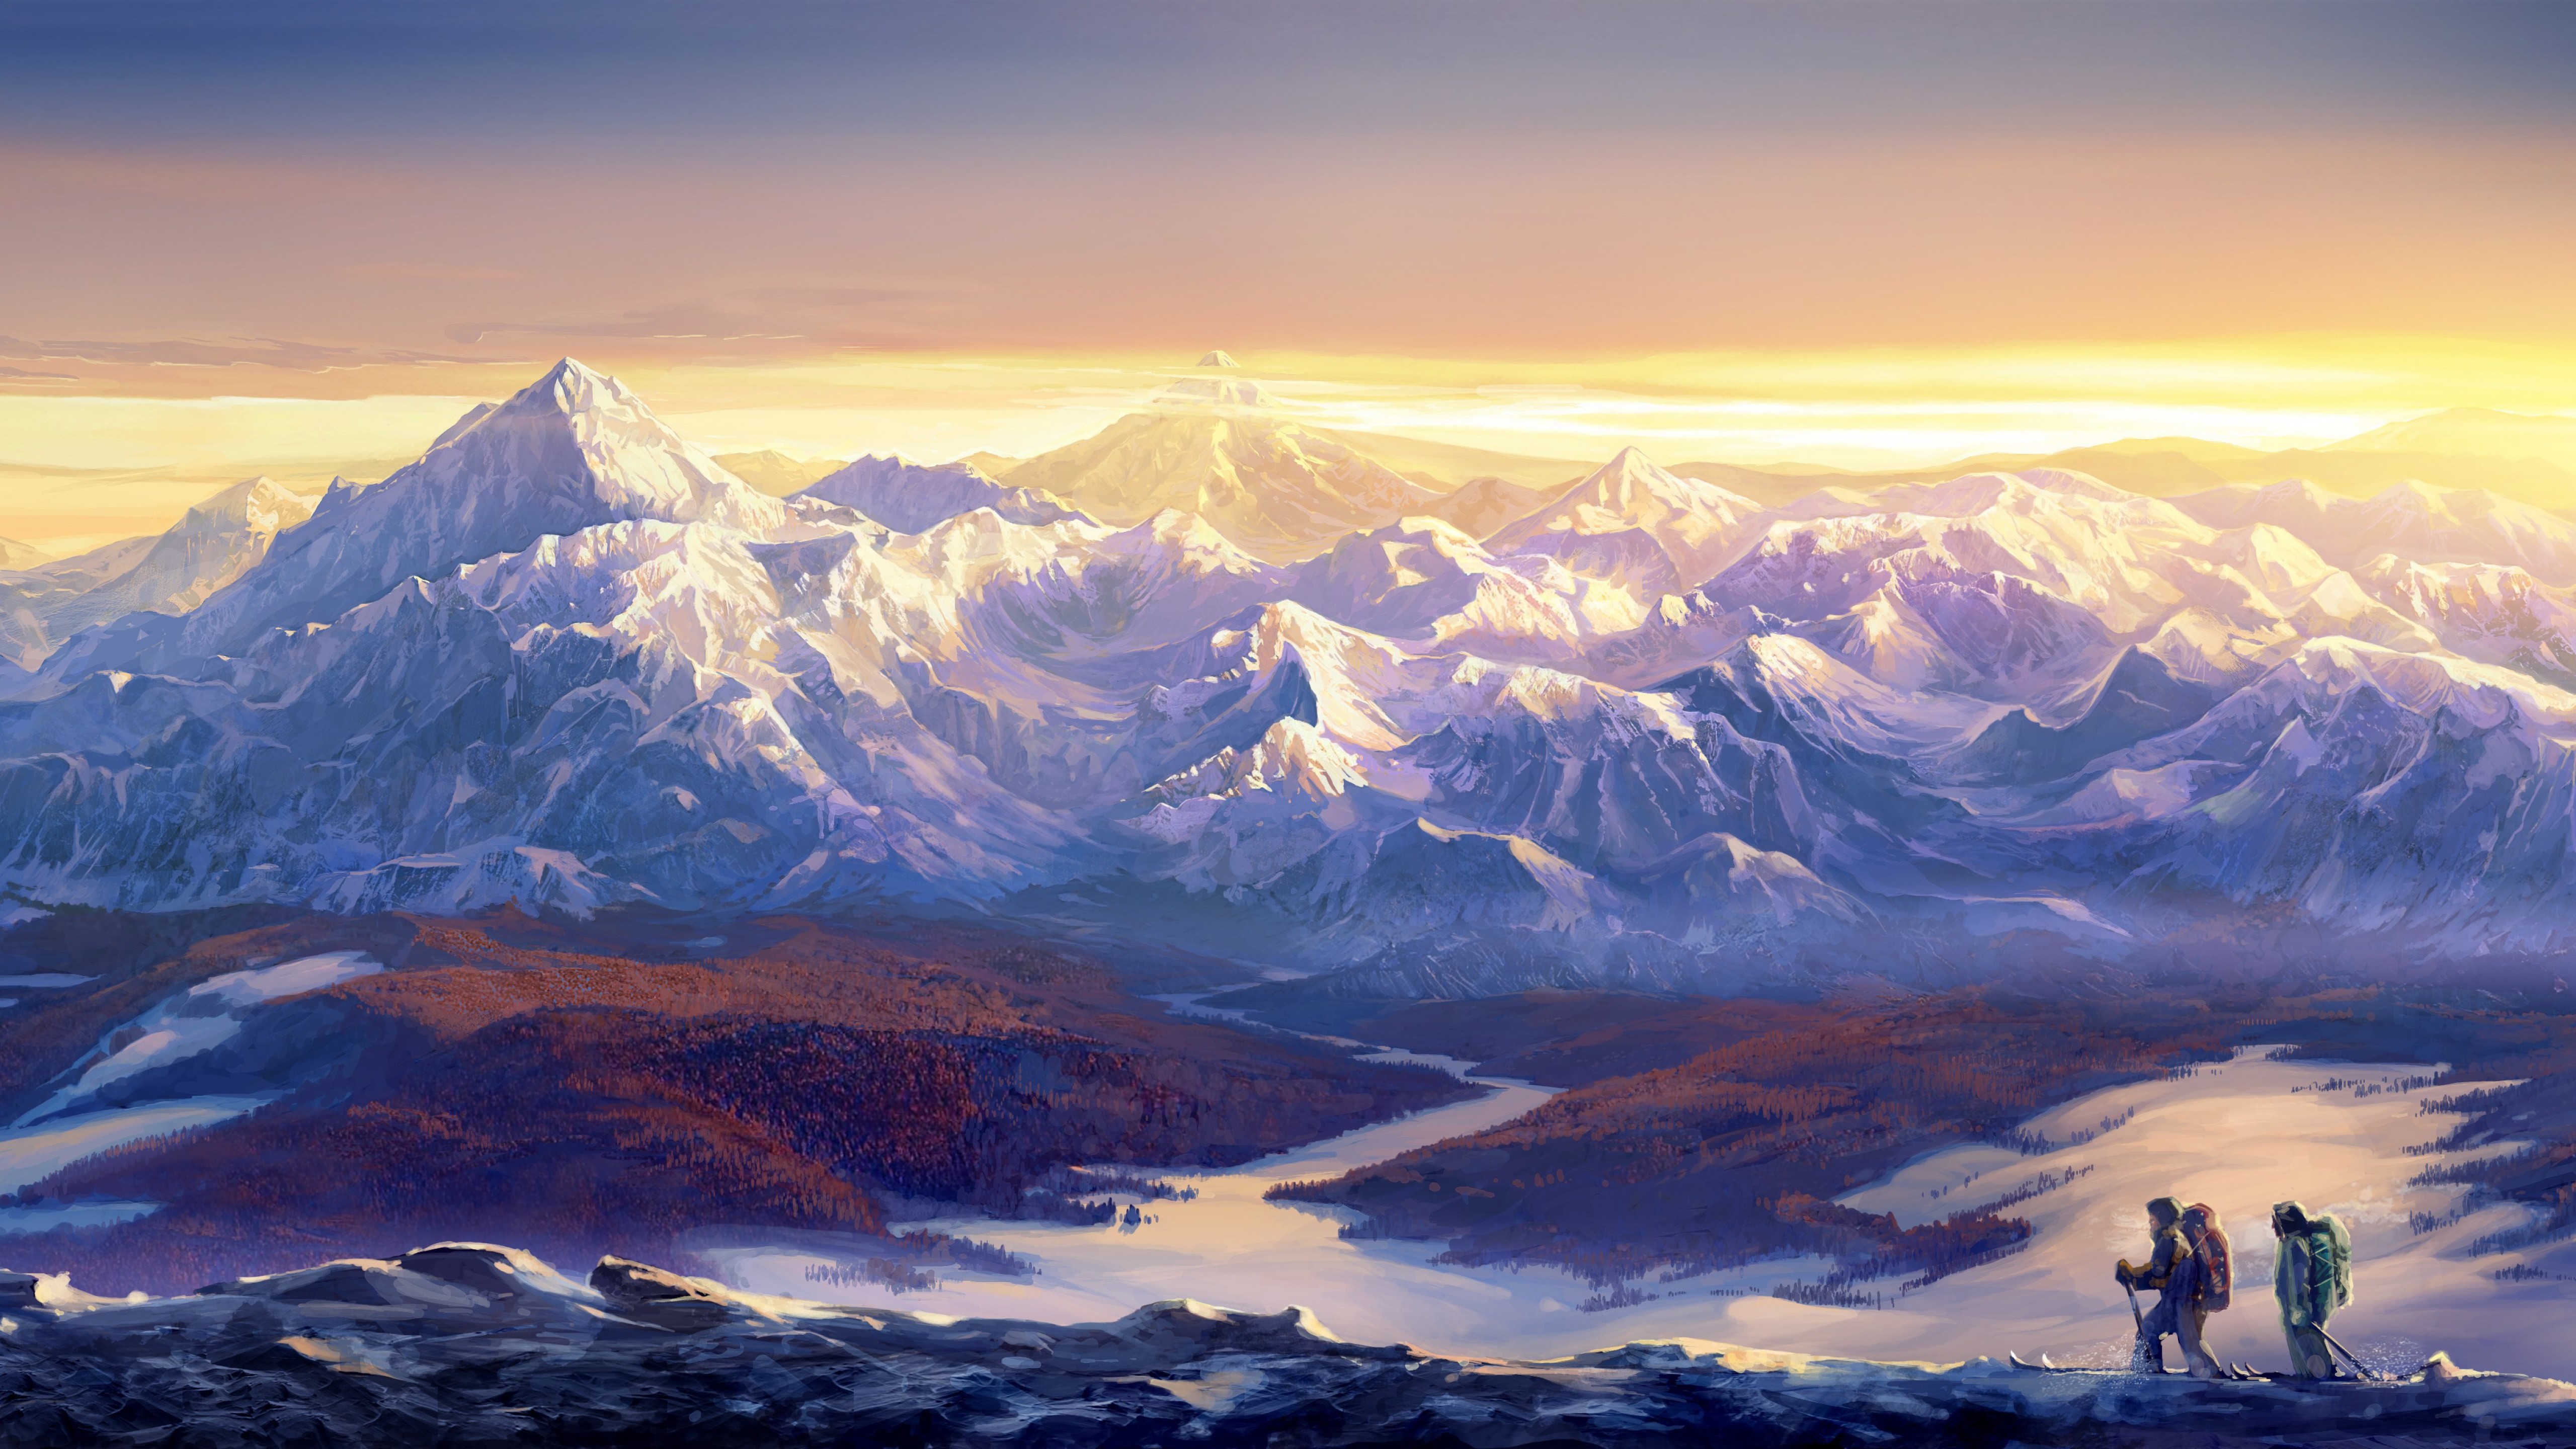 Mountain Painting , HD Wallpaper & Backgrounds